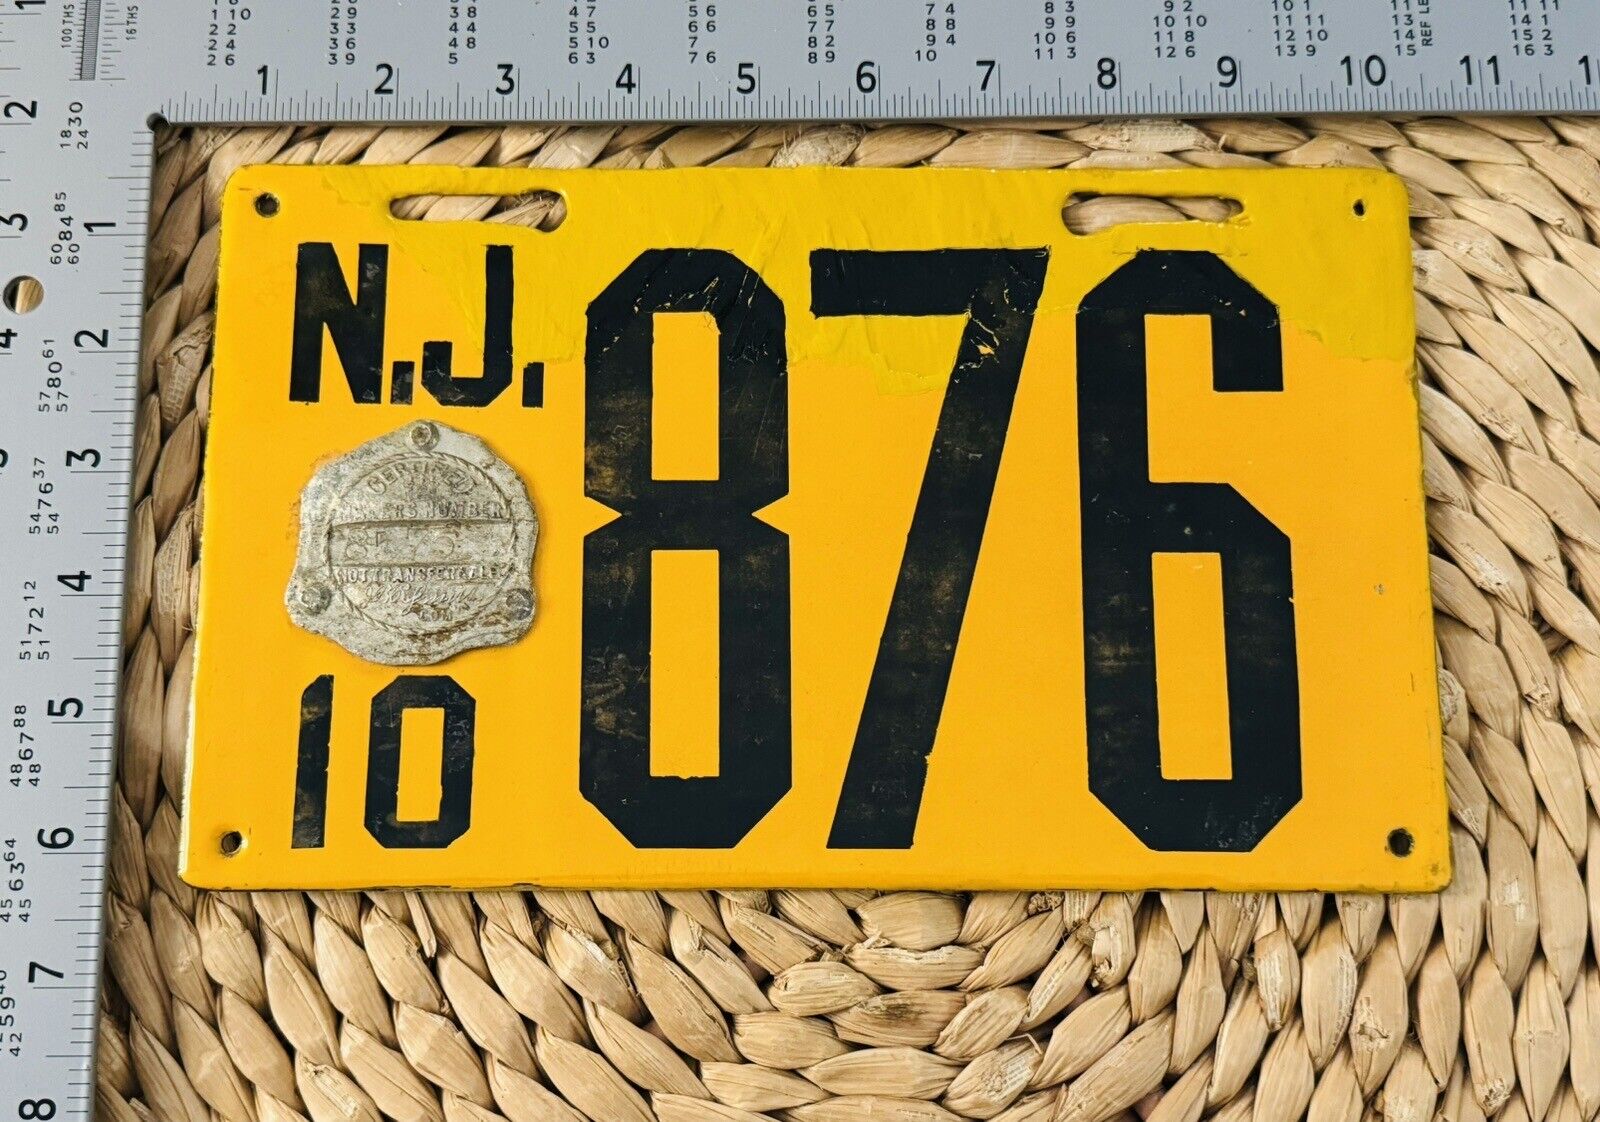 1910 New Jersey Porcelain License Plate 876 ALPCA STERN CONSIGNMENT TU